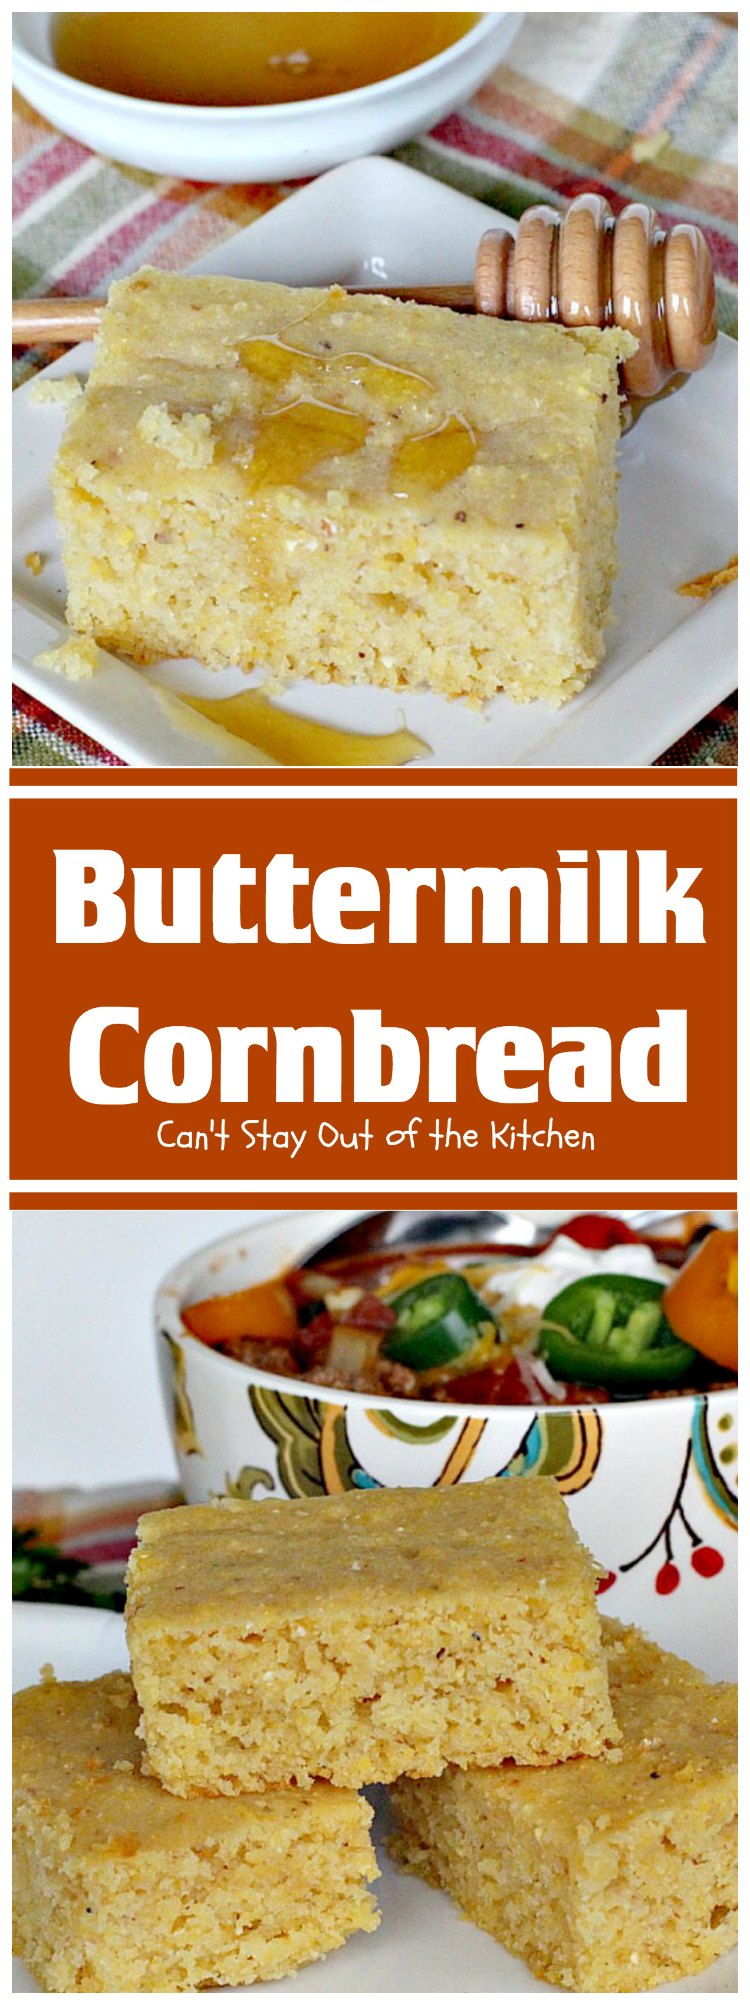 Buttermilk Cornbread – Can't Stay Out of the Kitchen